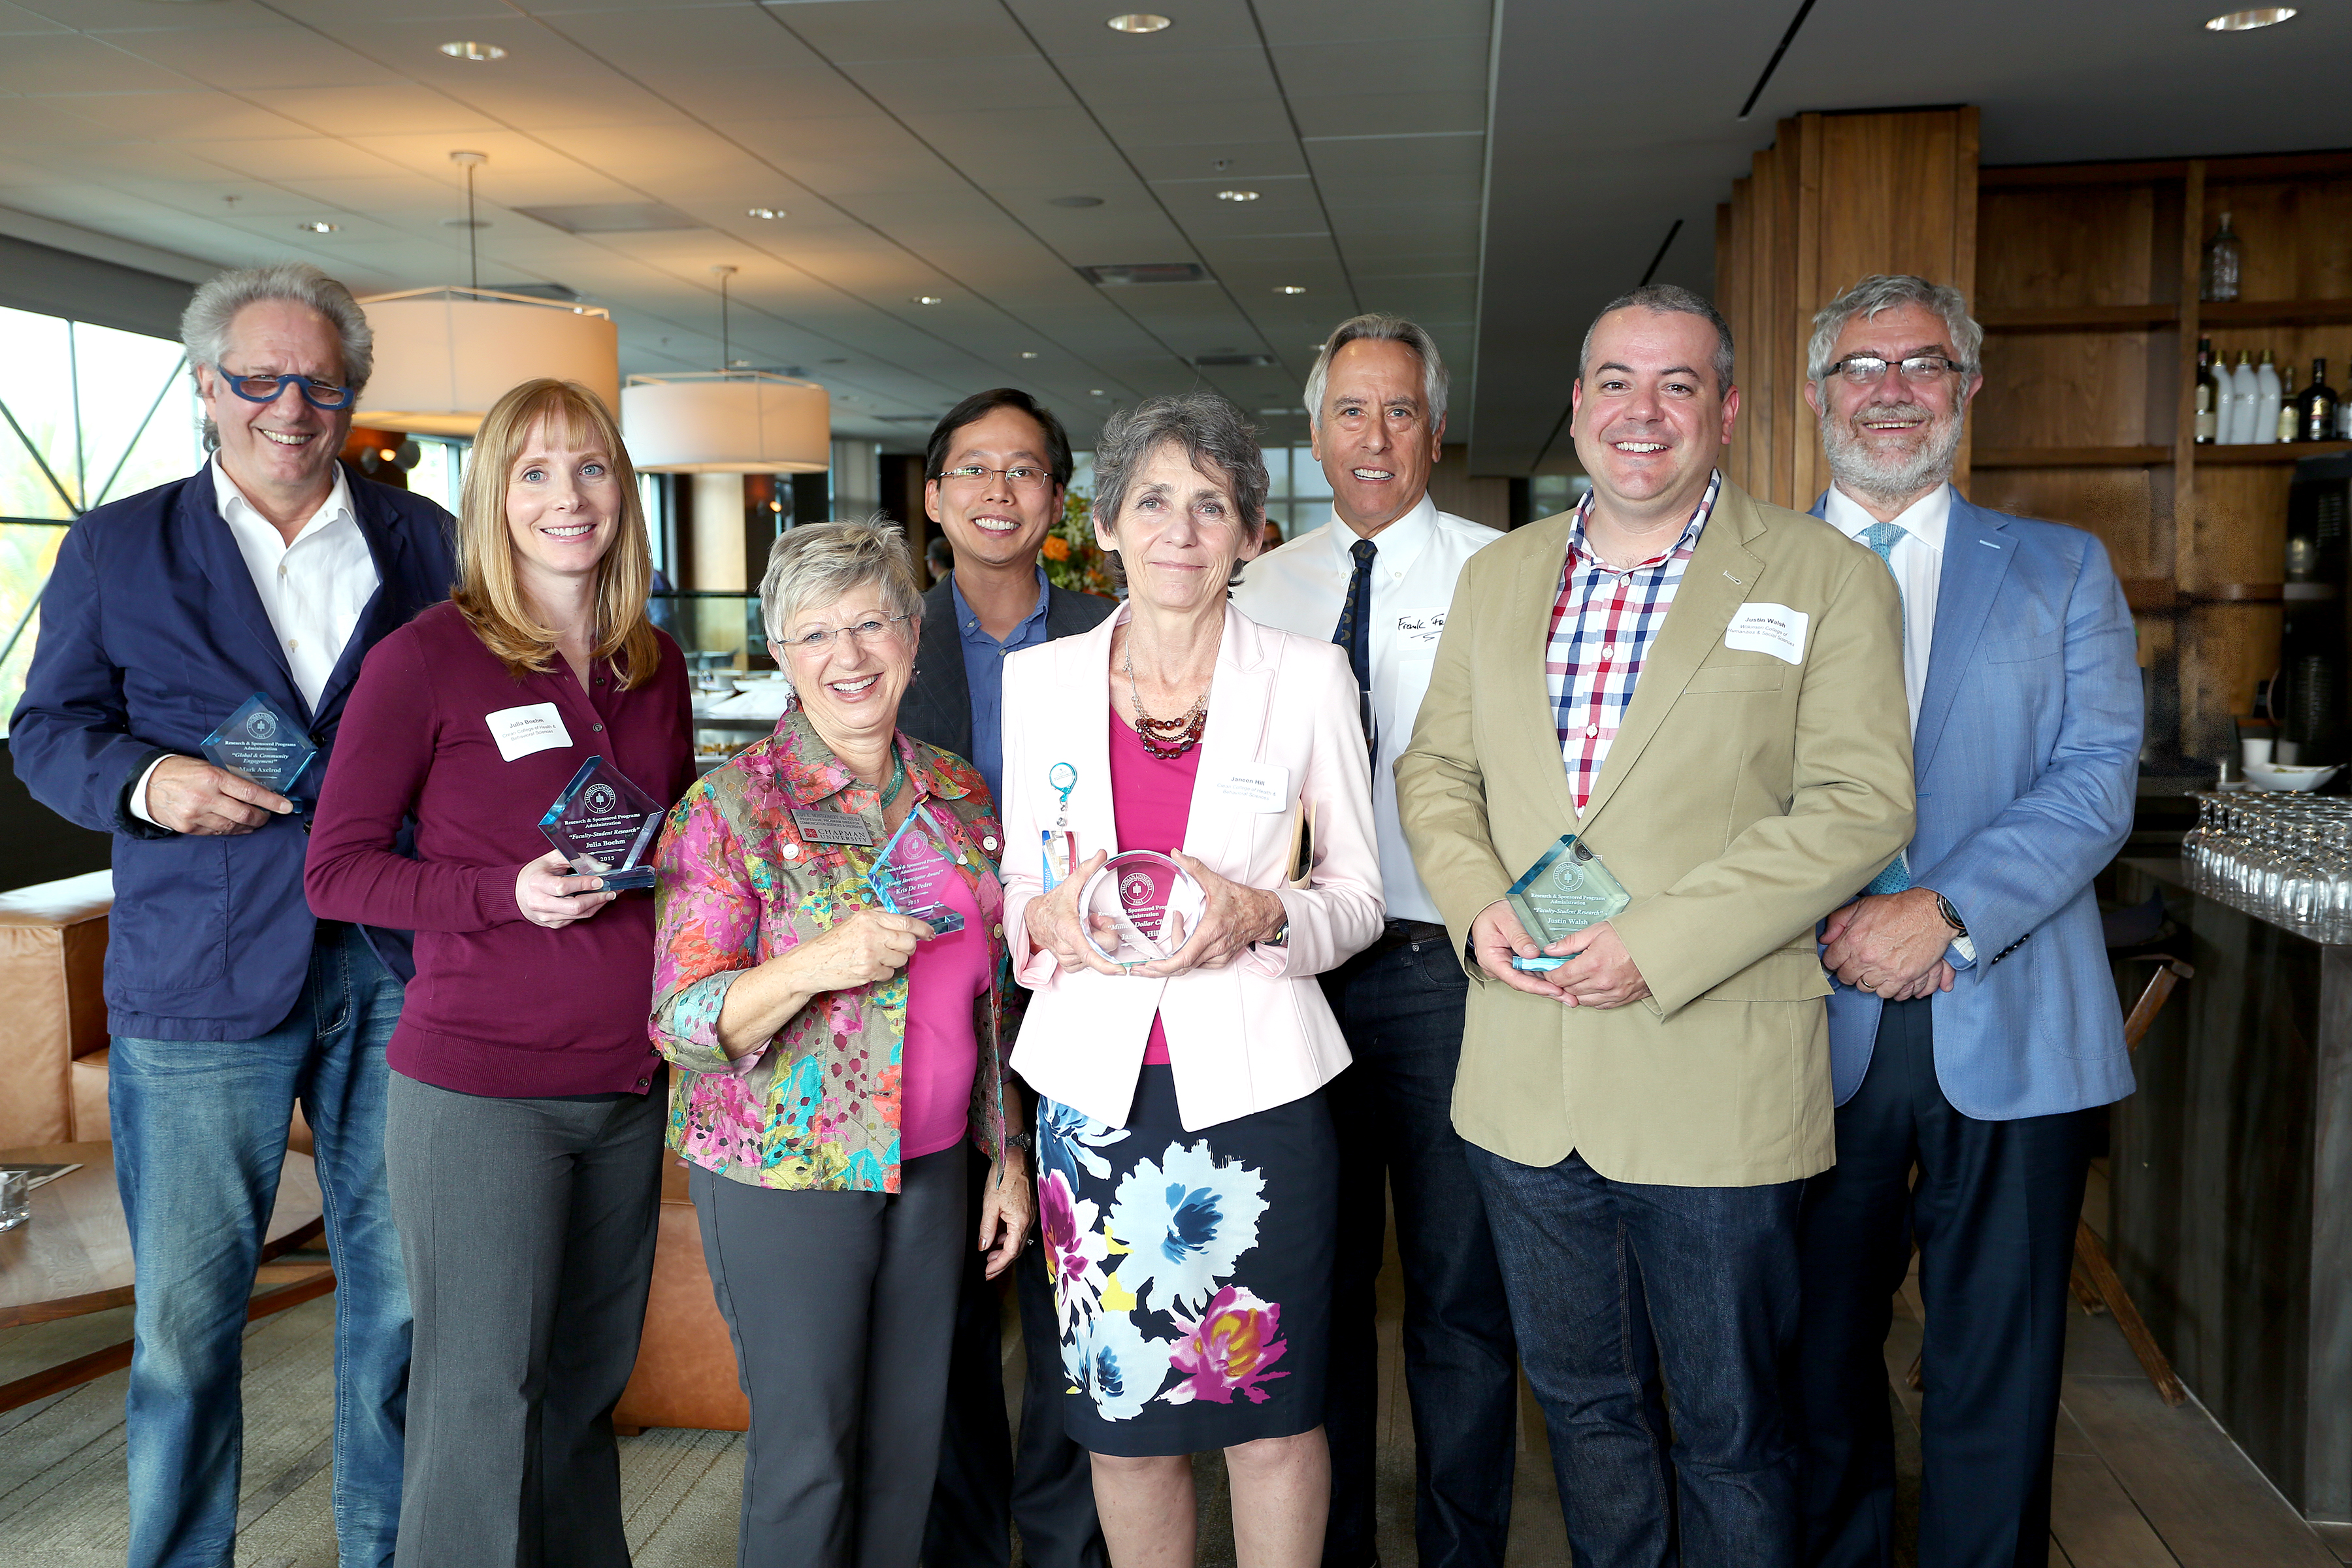 Together at the Faculty Research Recognition Reception are (from left) Mark Axelrod, Julia Boehm, Judy Montgomery (accepting for Kris De Pedro), Miao Zhang, Janeen Hill, Frank Frisch, Justin Walsh and Chancellor Danielle Struppa.